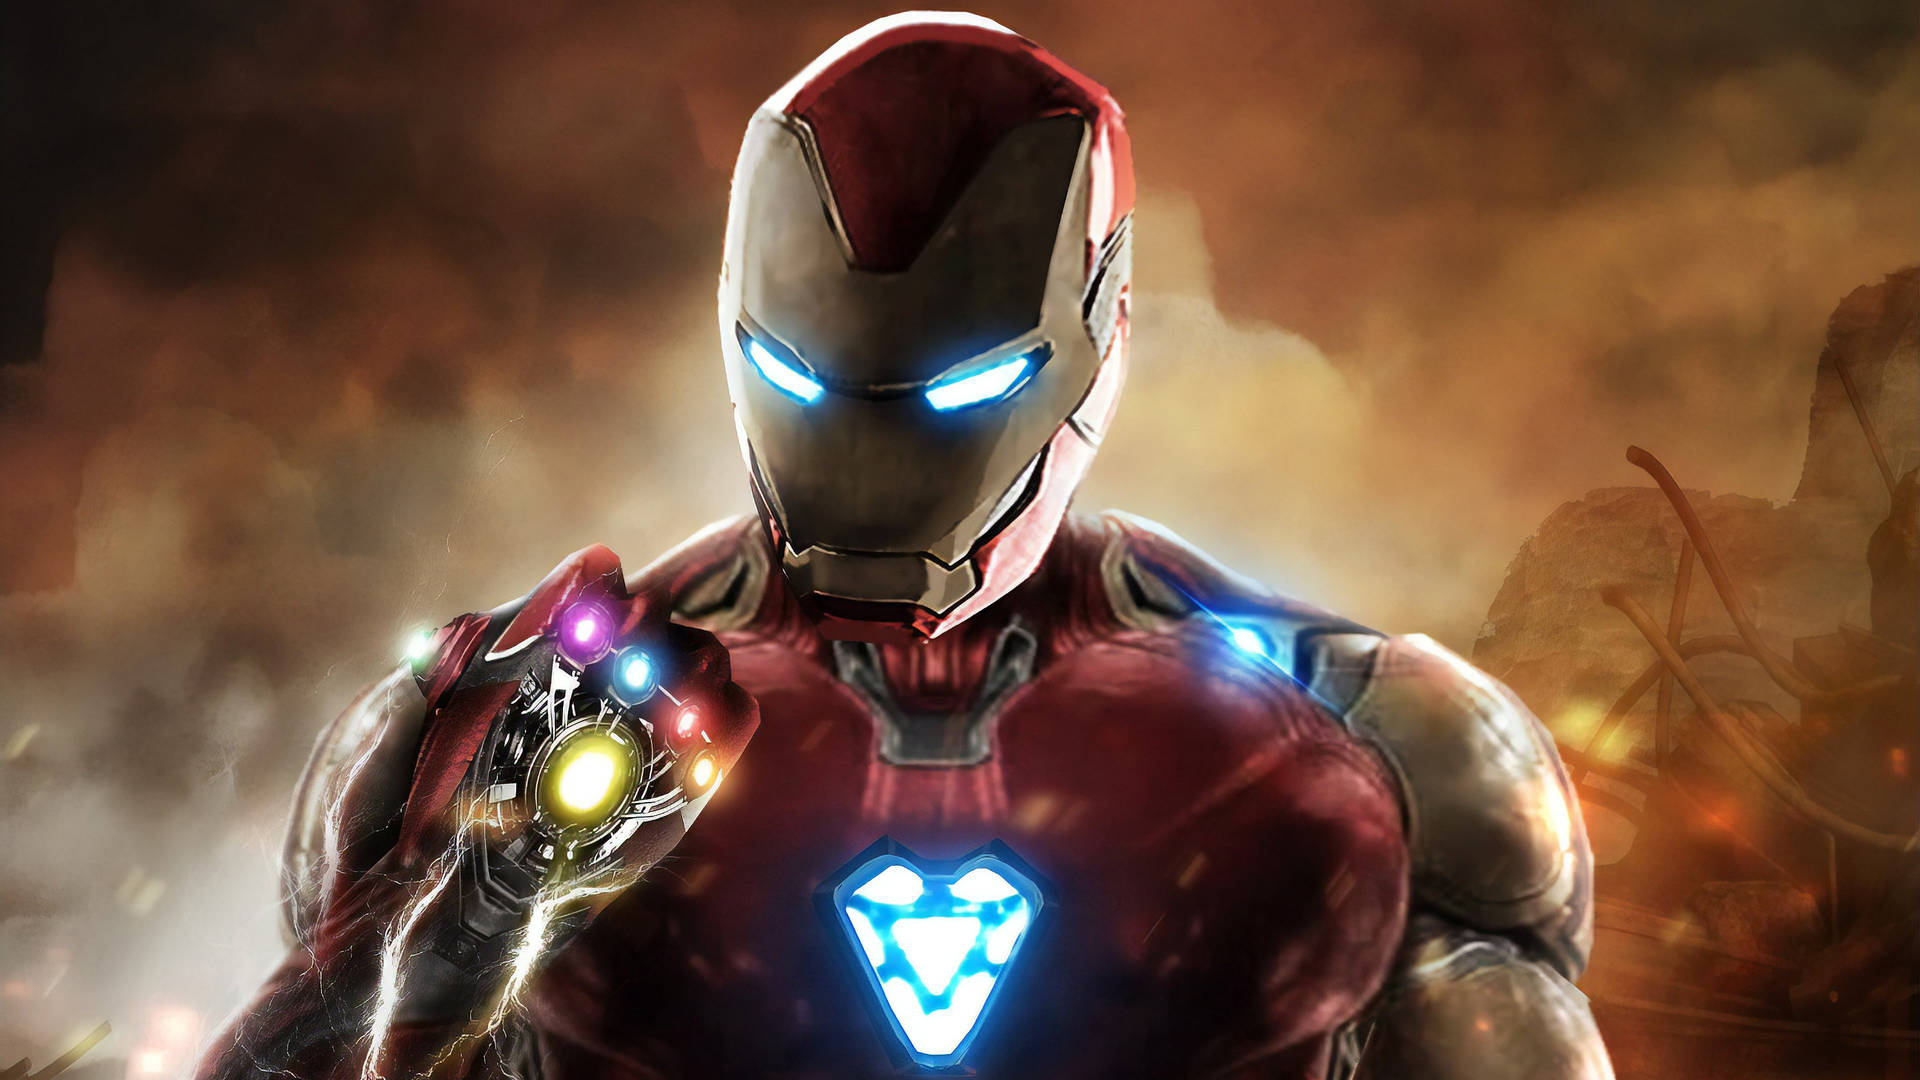 100+] Iron Man Mark 85 Background S For Free | Wallpapers.Com